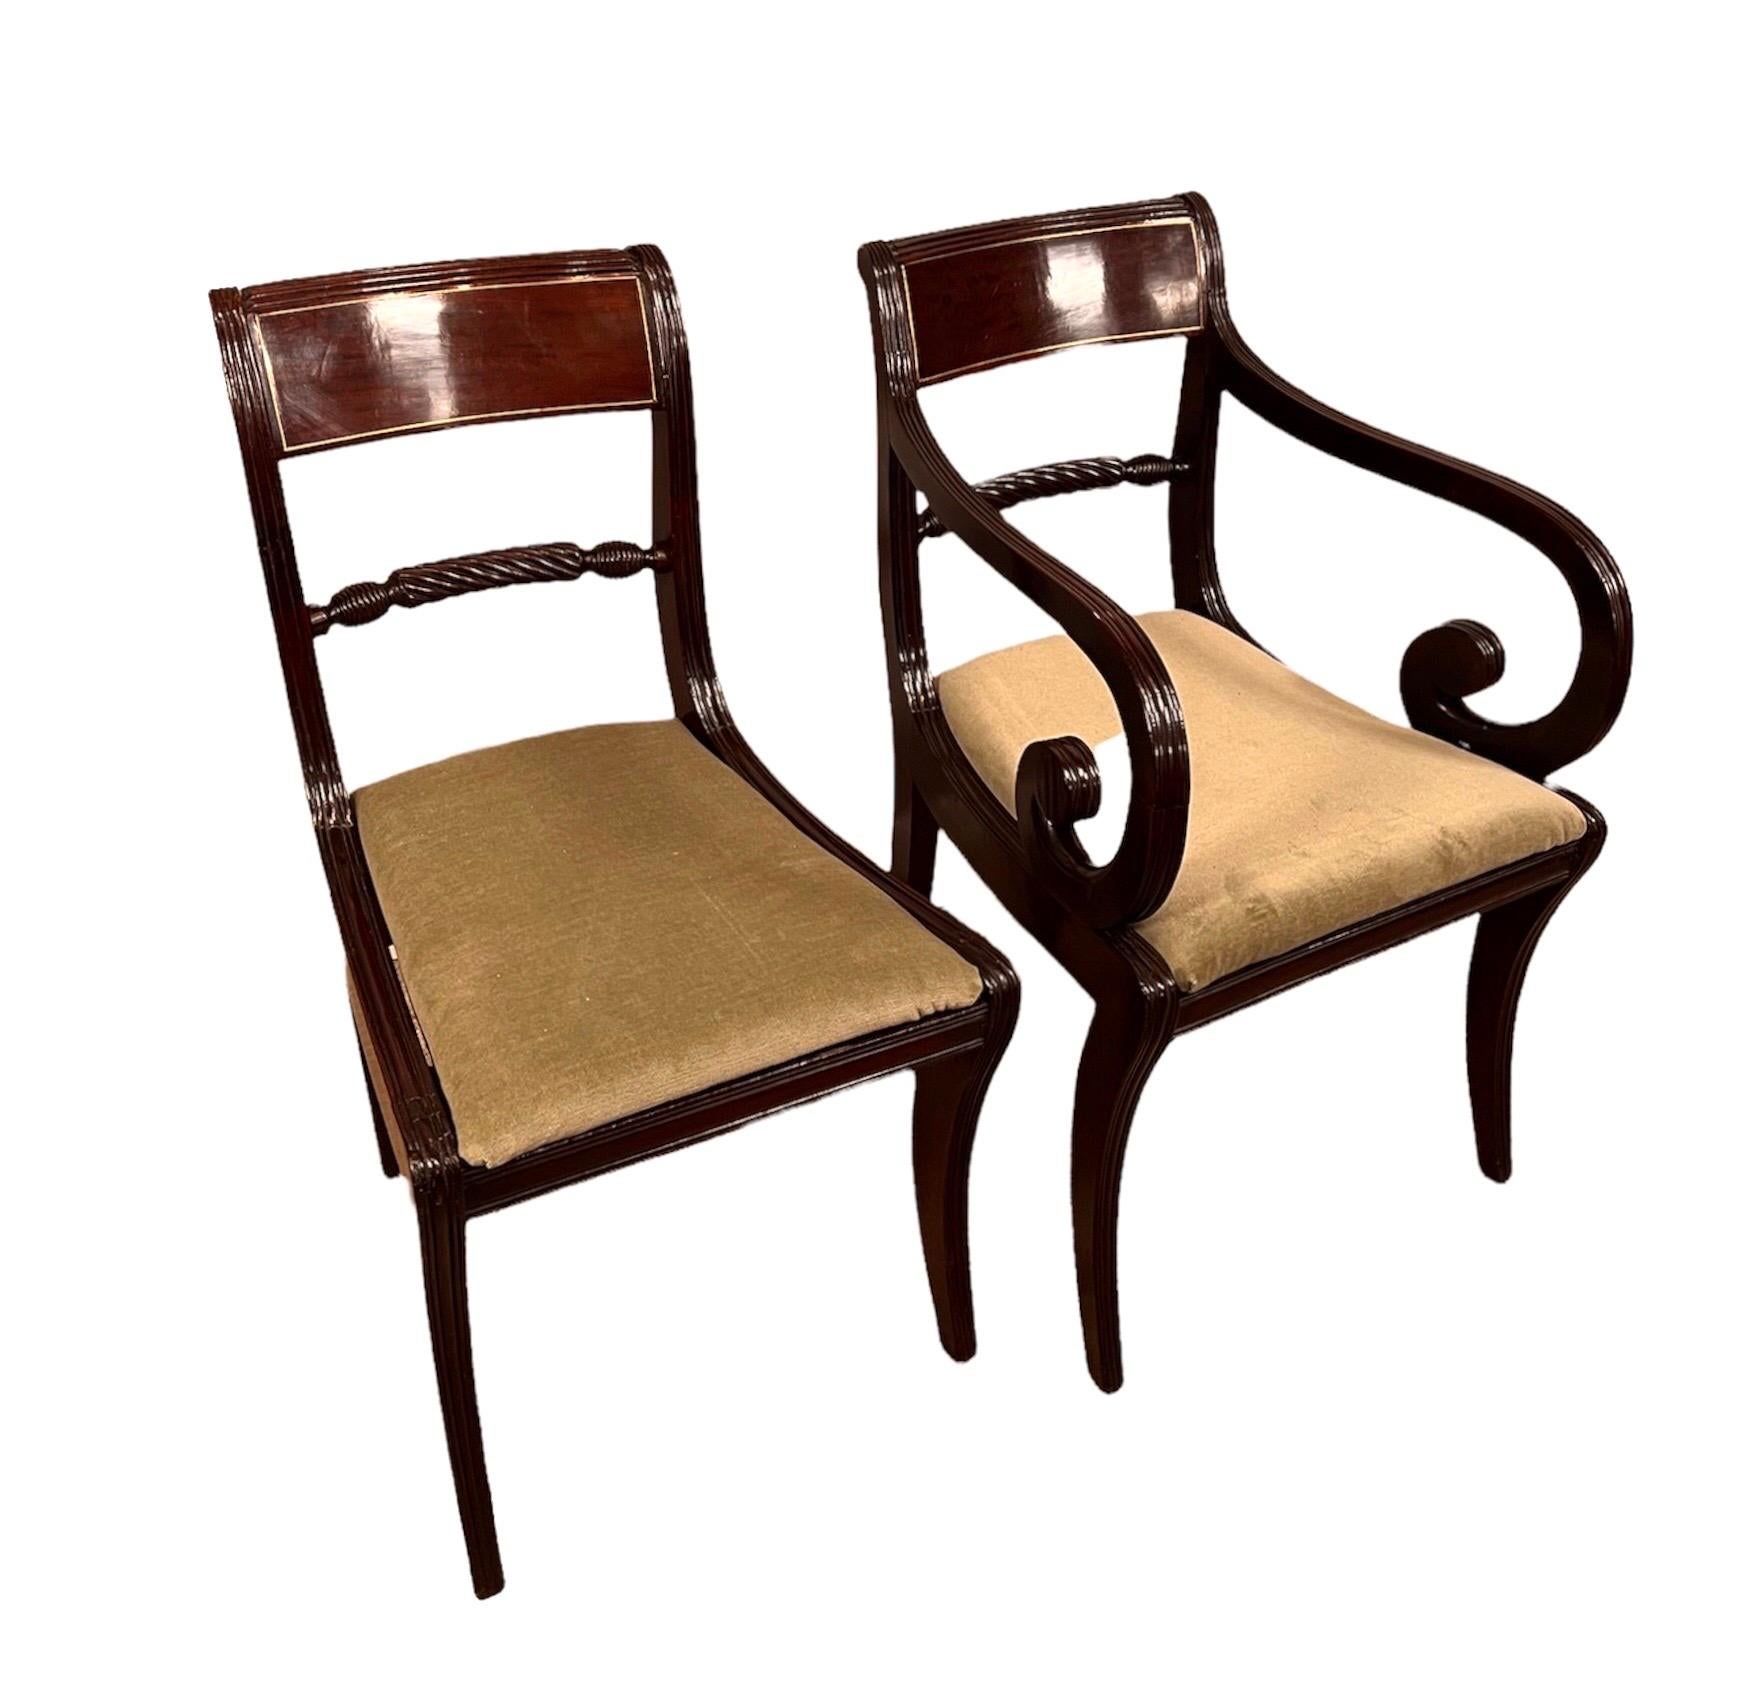 A set of ten Regency mahogany dining chairs, c.1810 2 Arm , 8 Side chairs the panelled crest rails with Brass line inlay , above turned rope twist splats, over upholstered slip seats, raised on sabre legs (10) total.